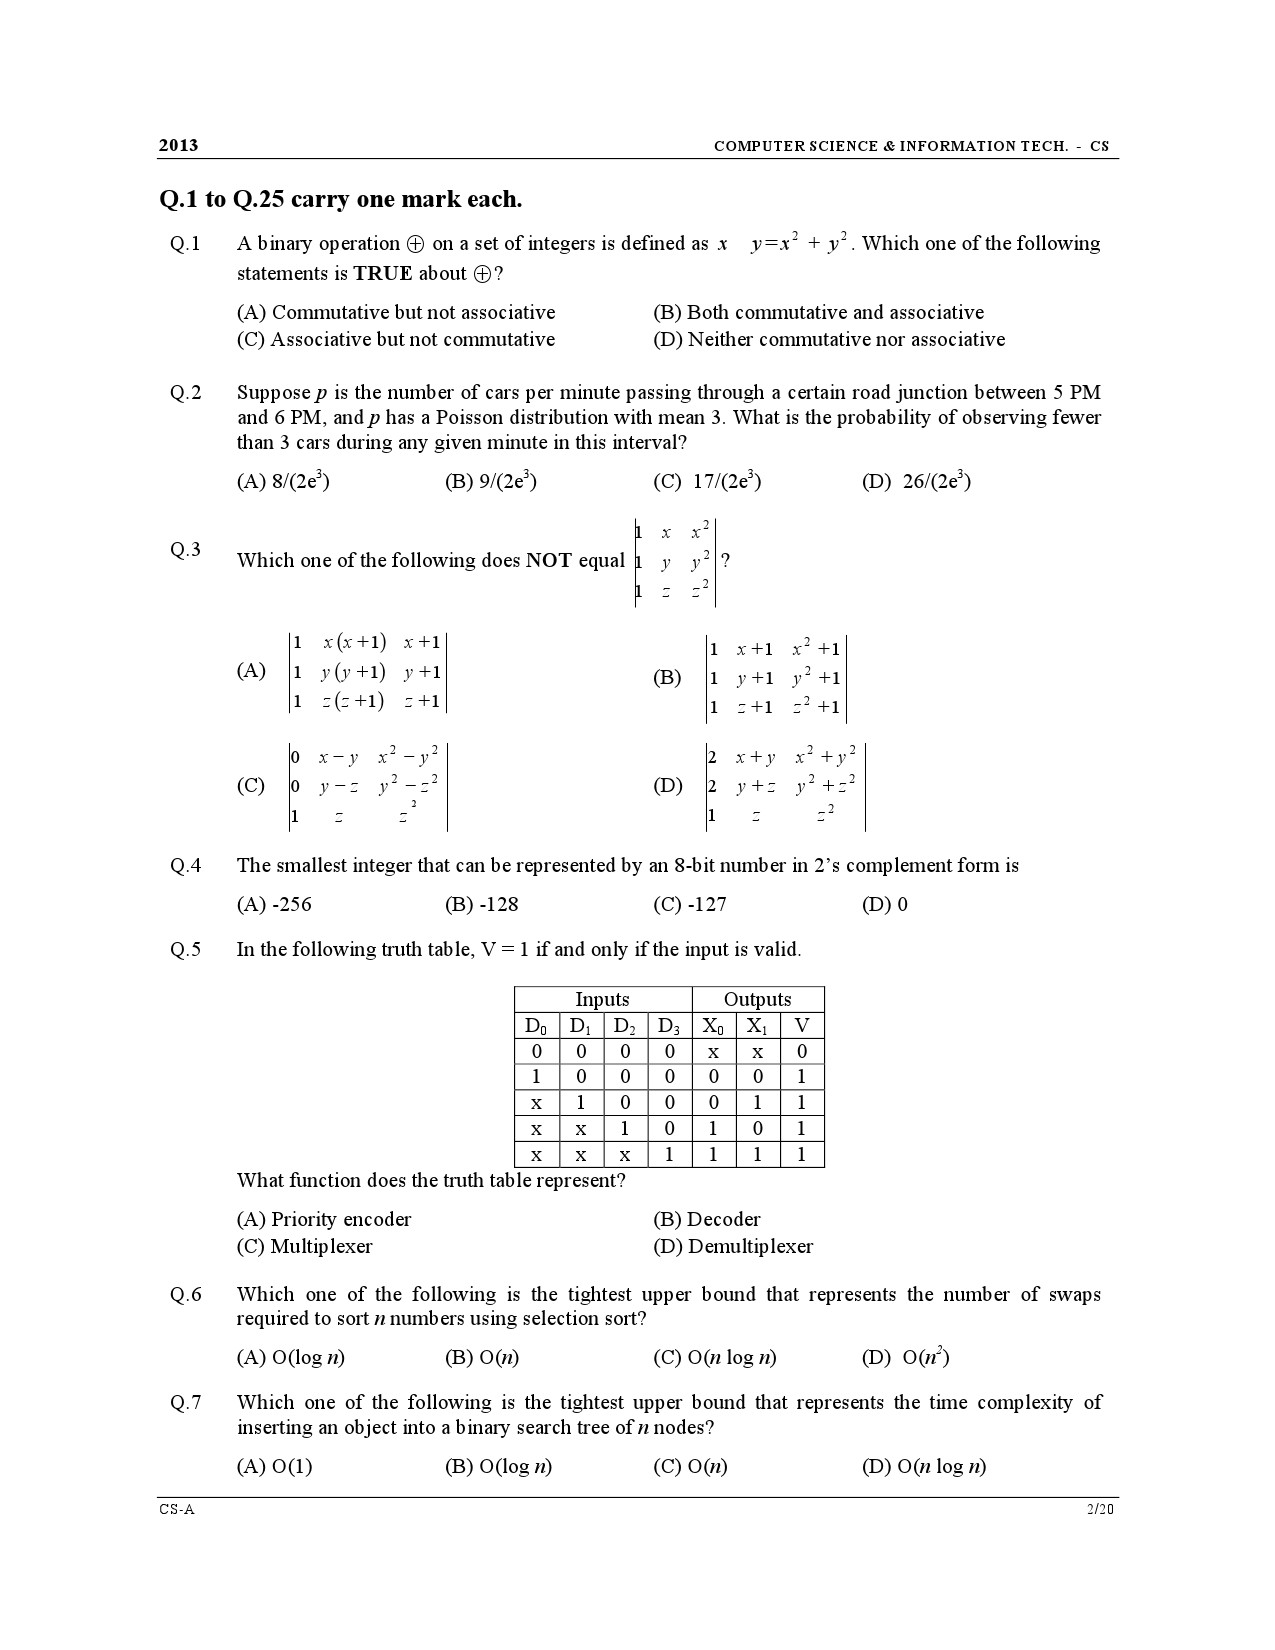 GATE Exam Question Paper 2013 Computer Science and Information Technology 2